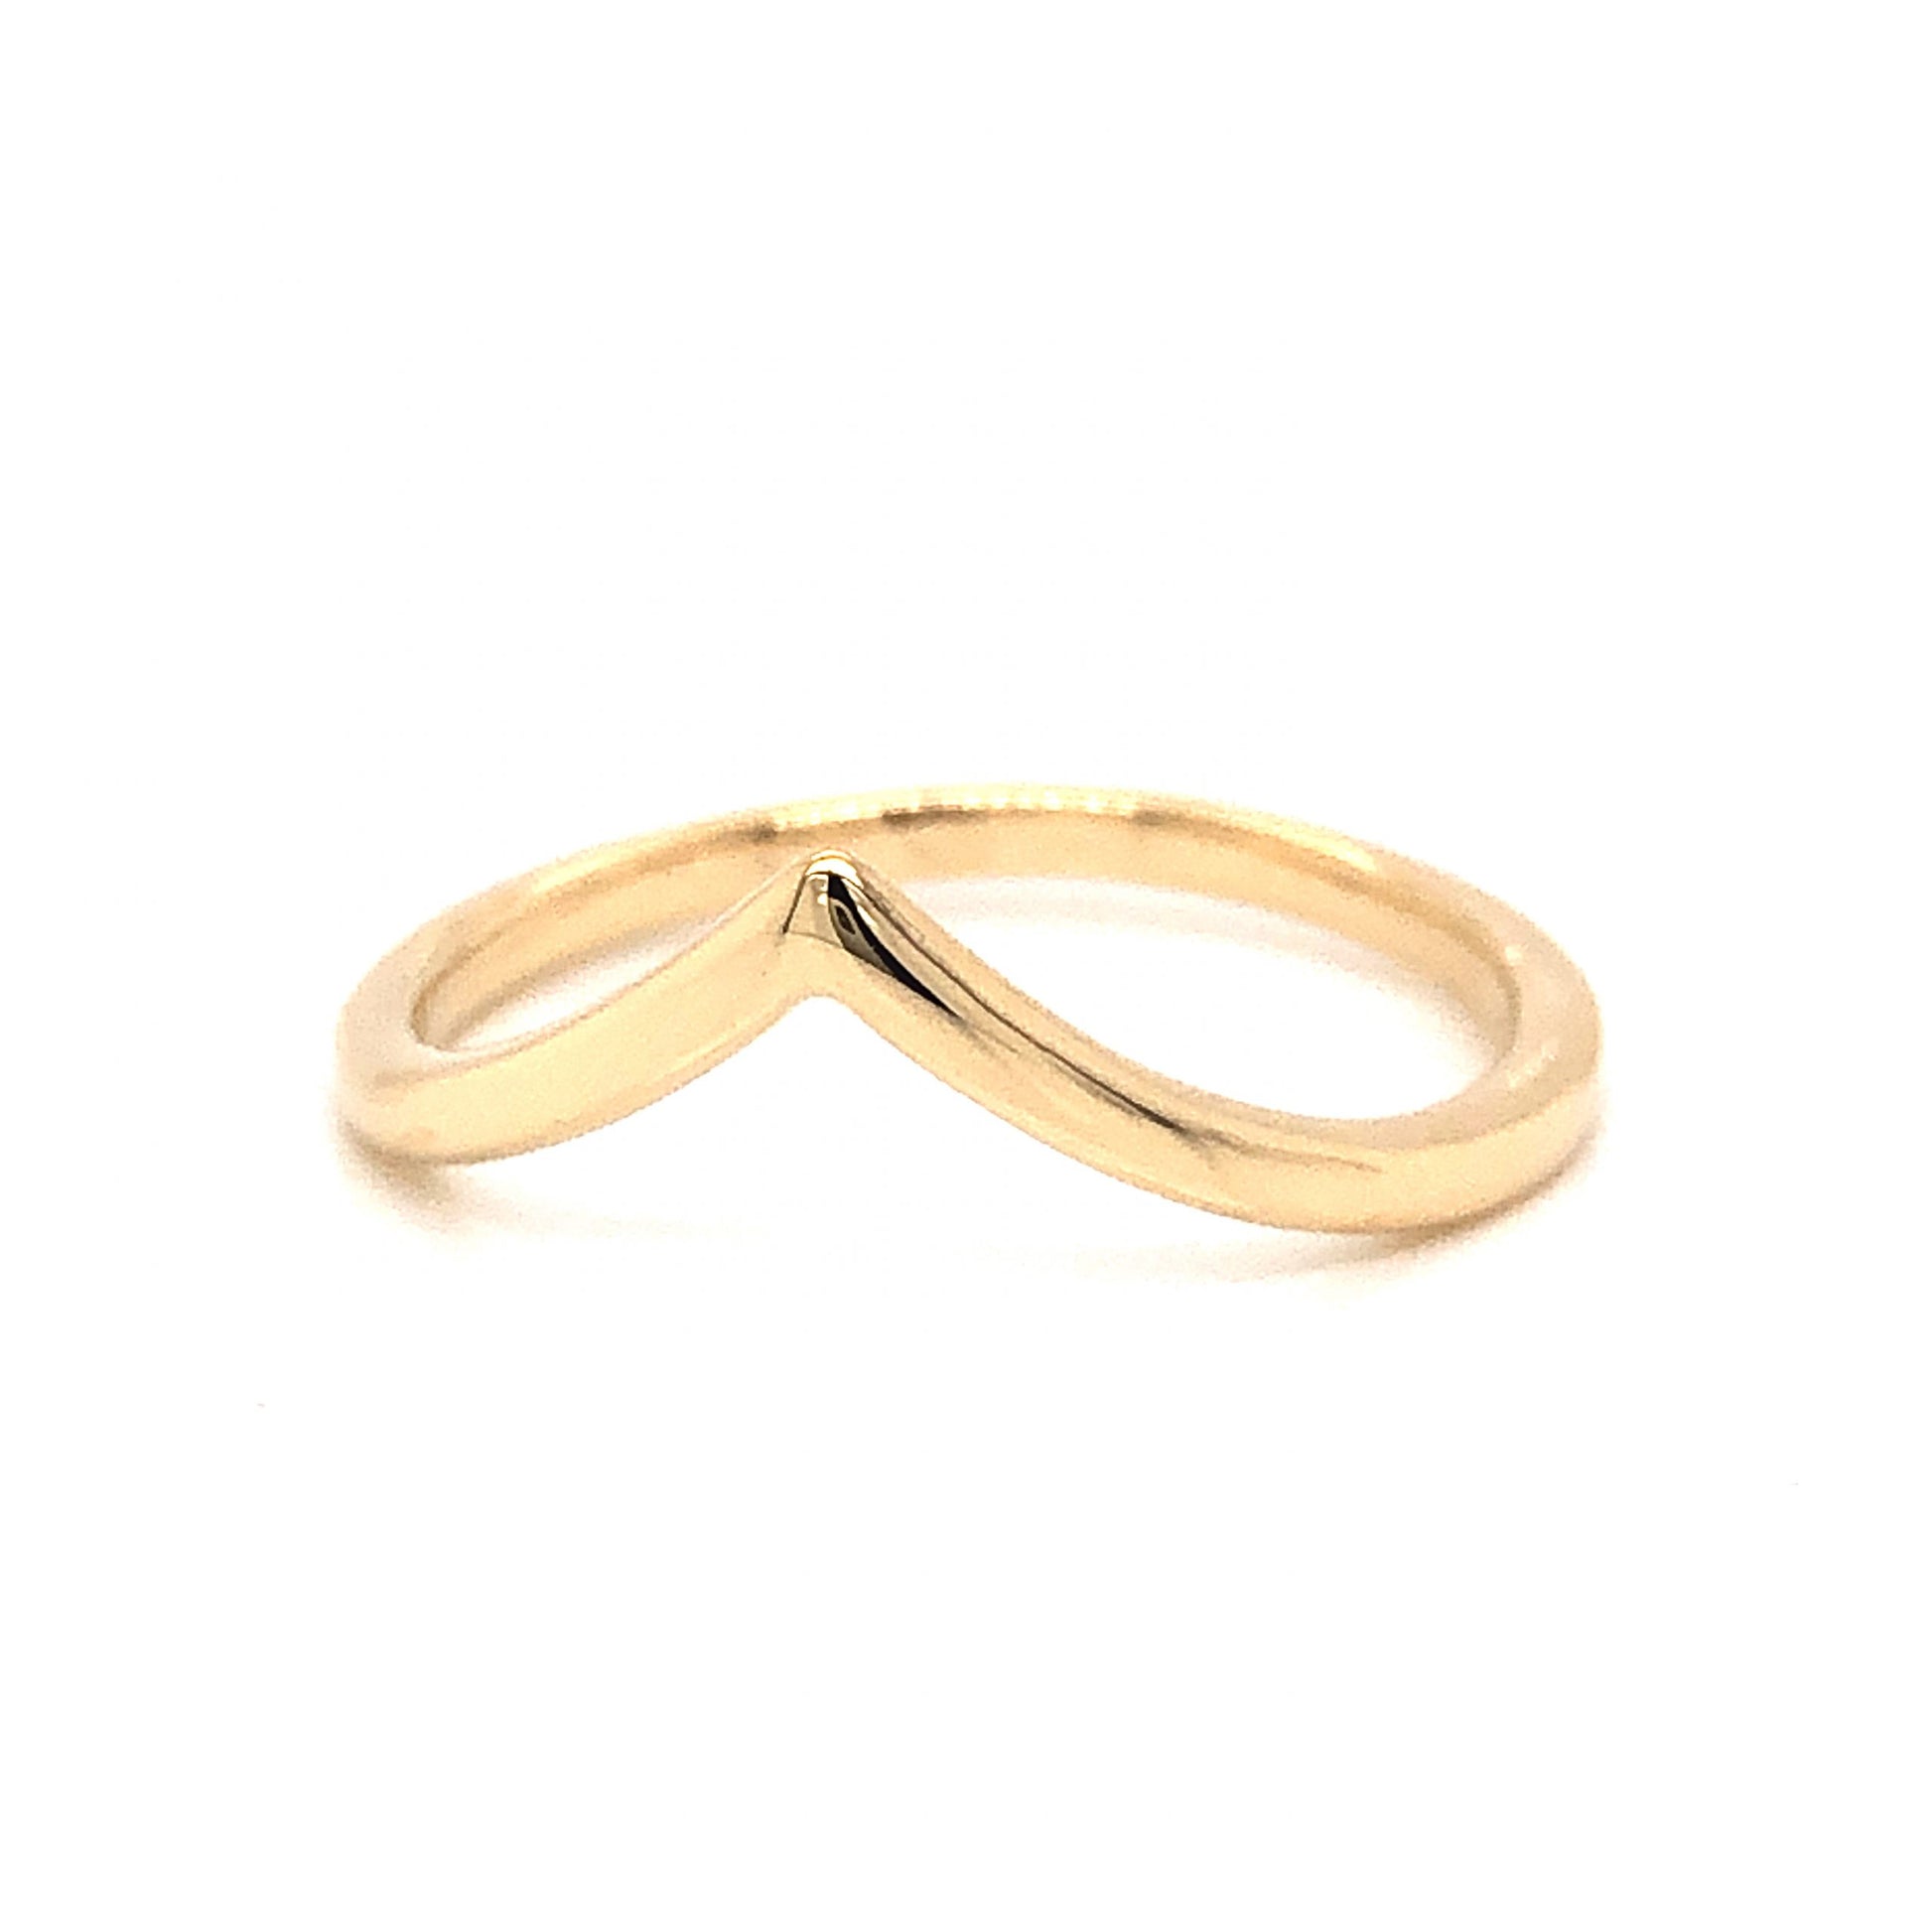 Thin Contoured Wedding Band in 14k Yellow GoldComposition: 14 Karat Yellow GoldRing Size: 7.5Total Gram Weight: 1.9 gInscription: 14k